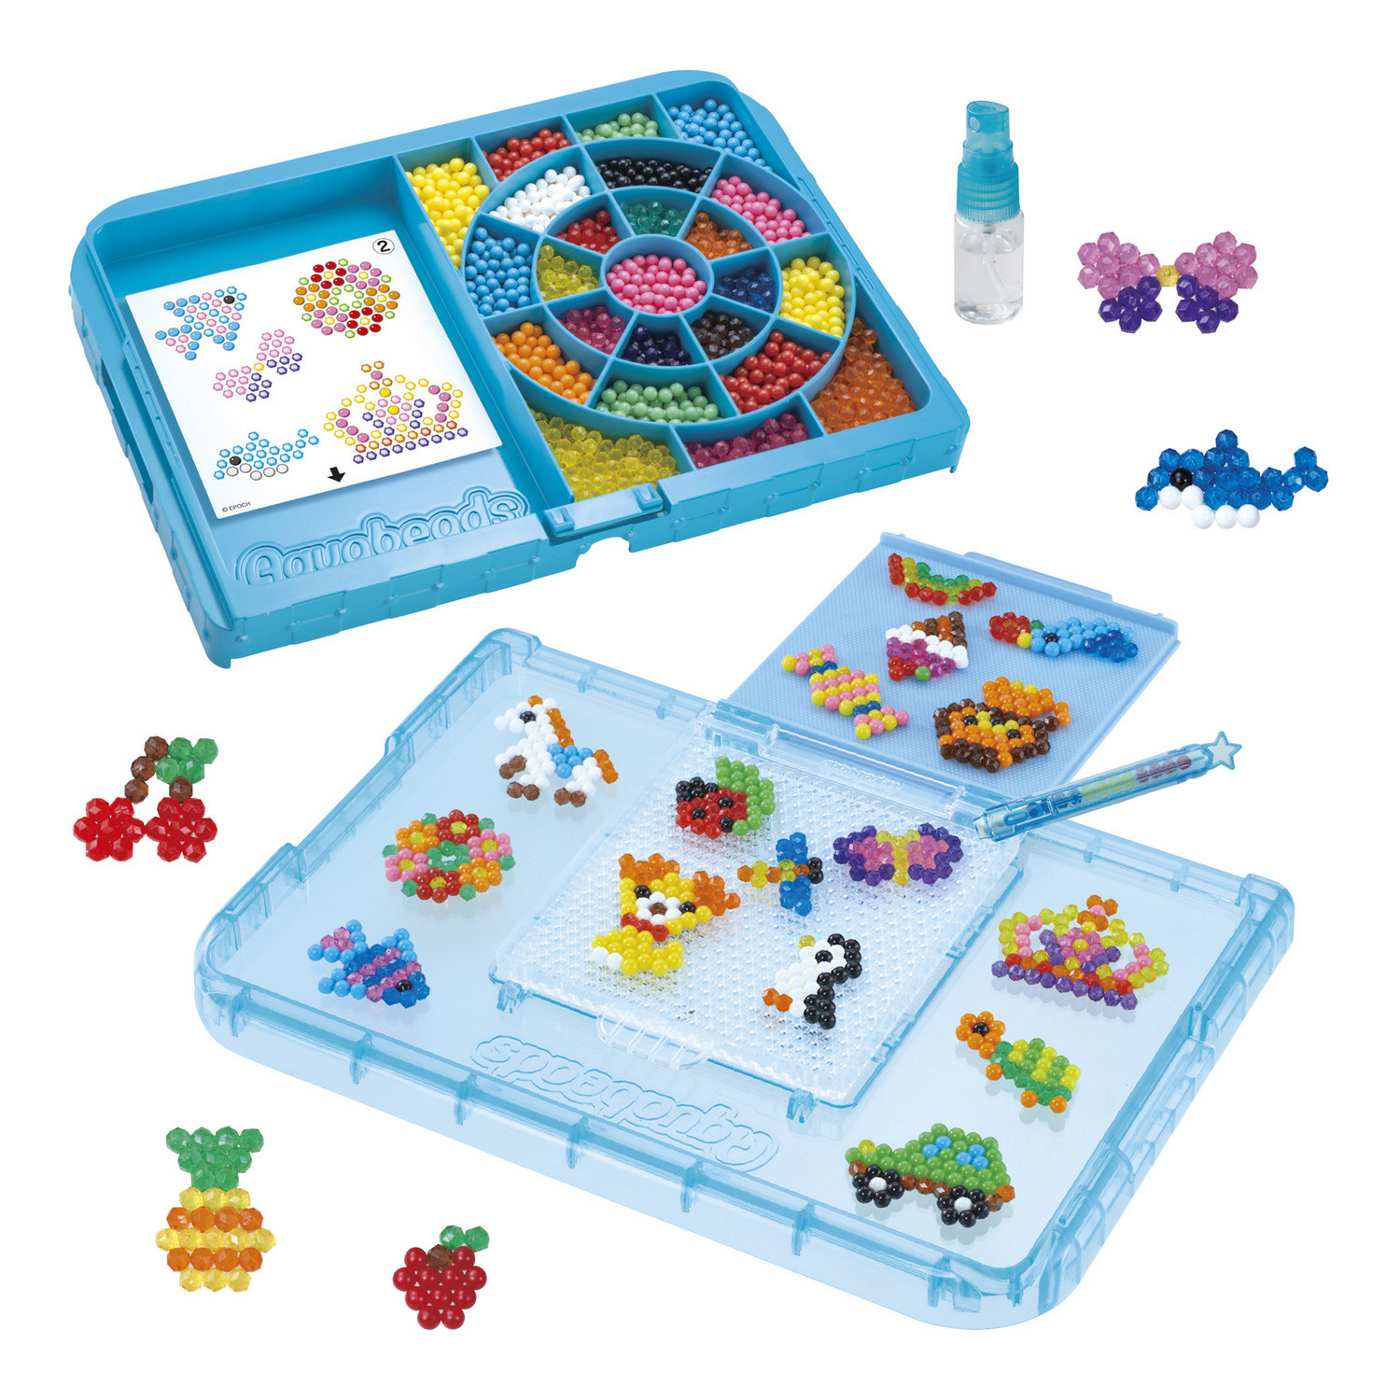 Aquabeads: Beginners Carry Case – Blickenstaffs Toy Store